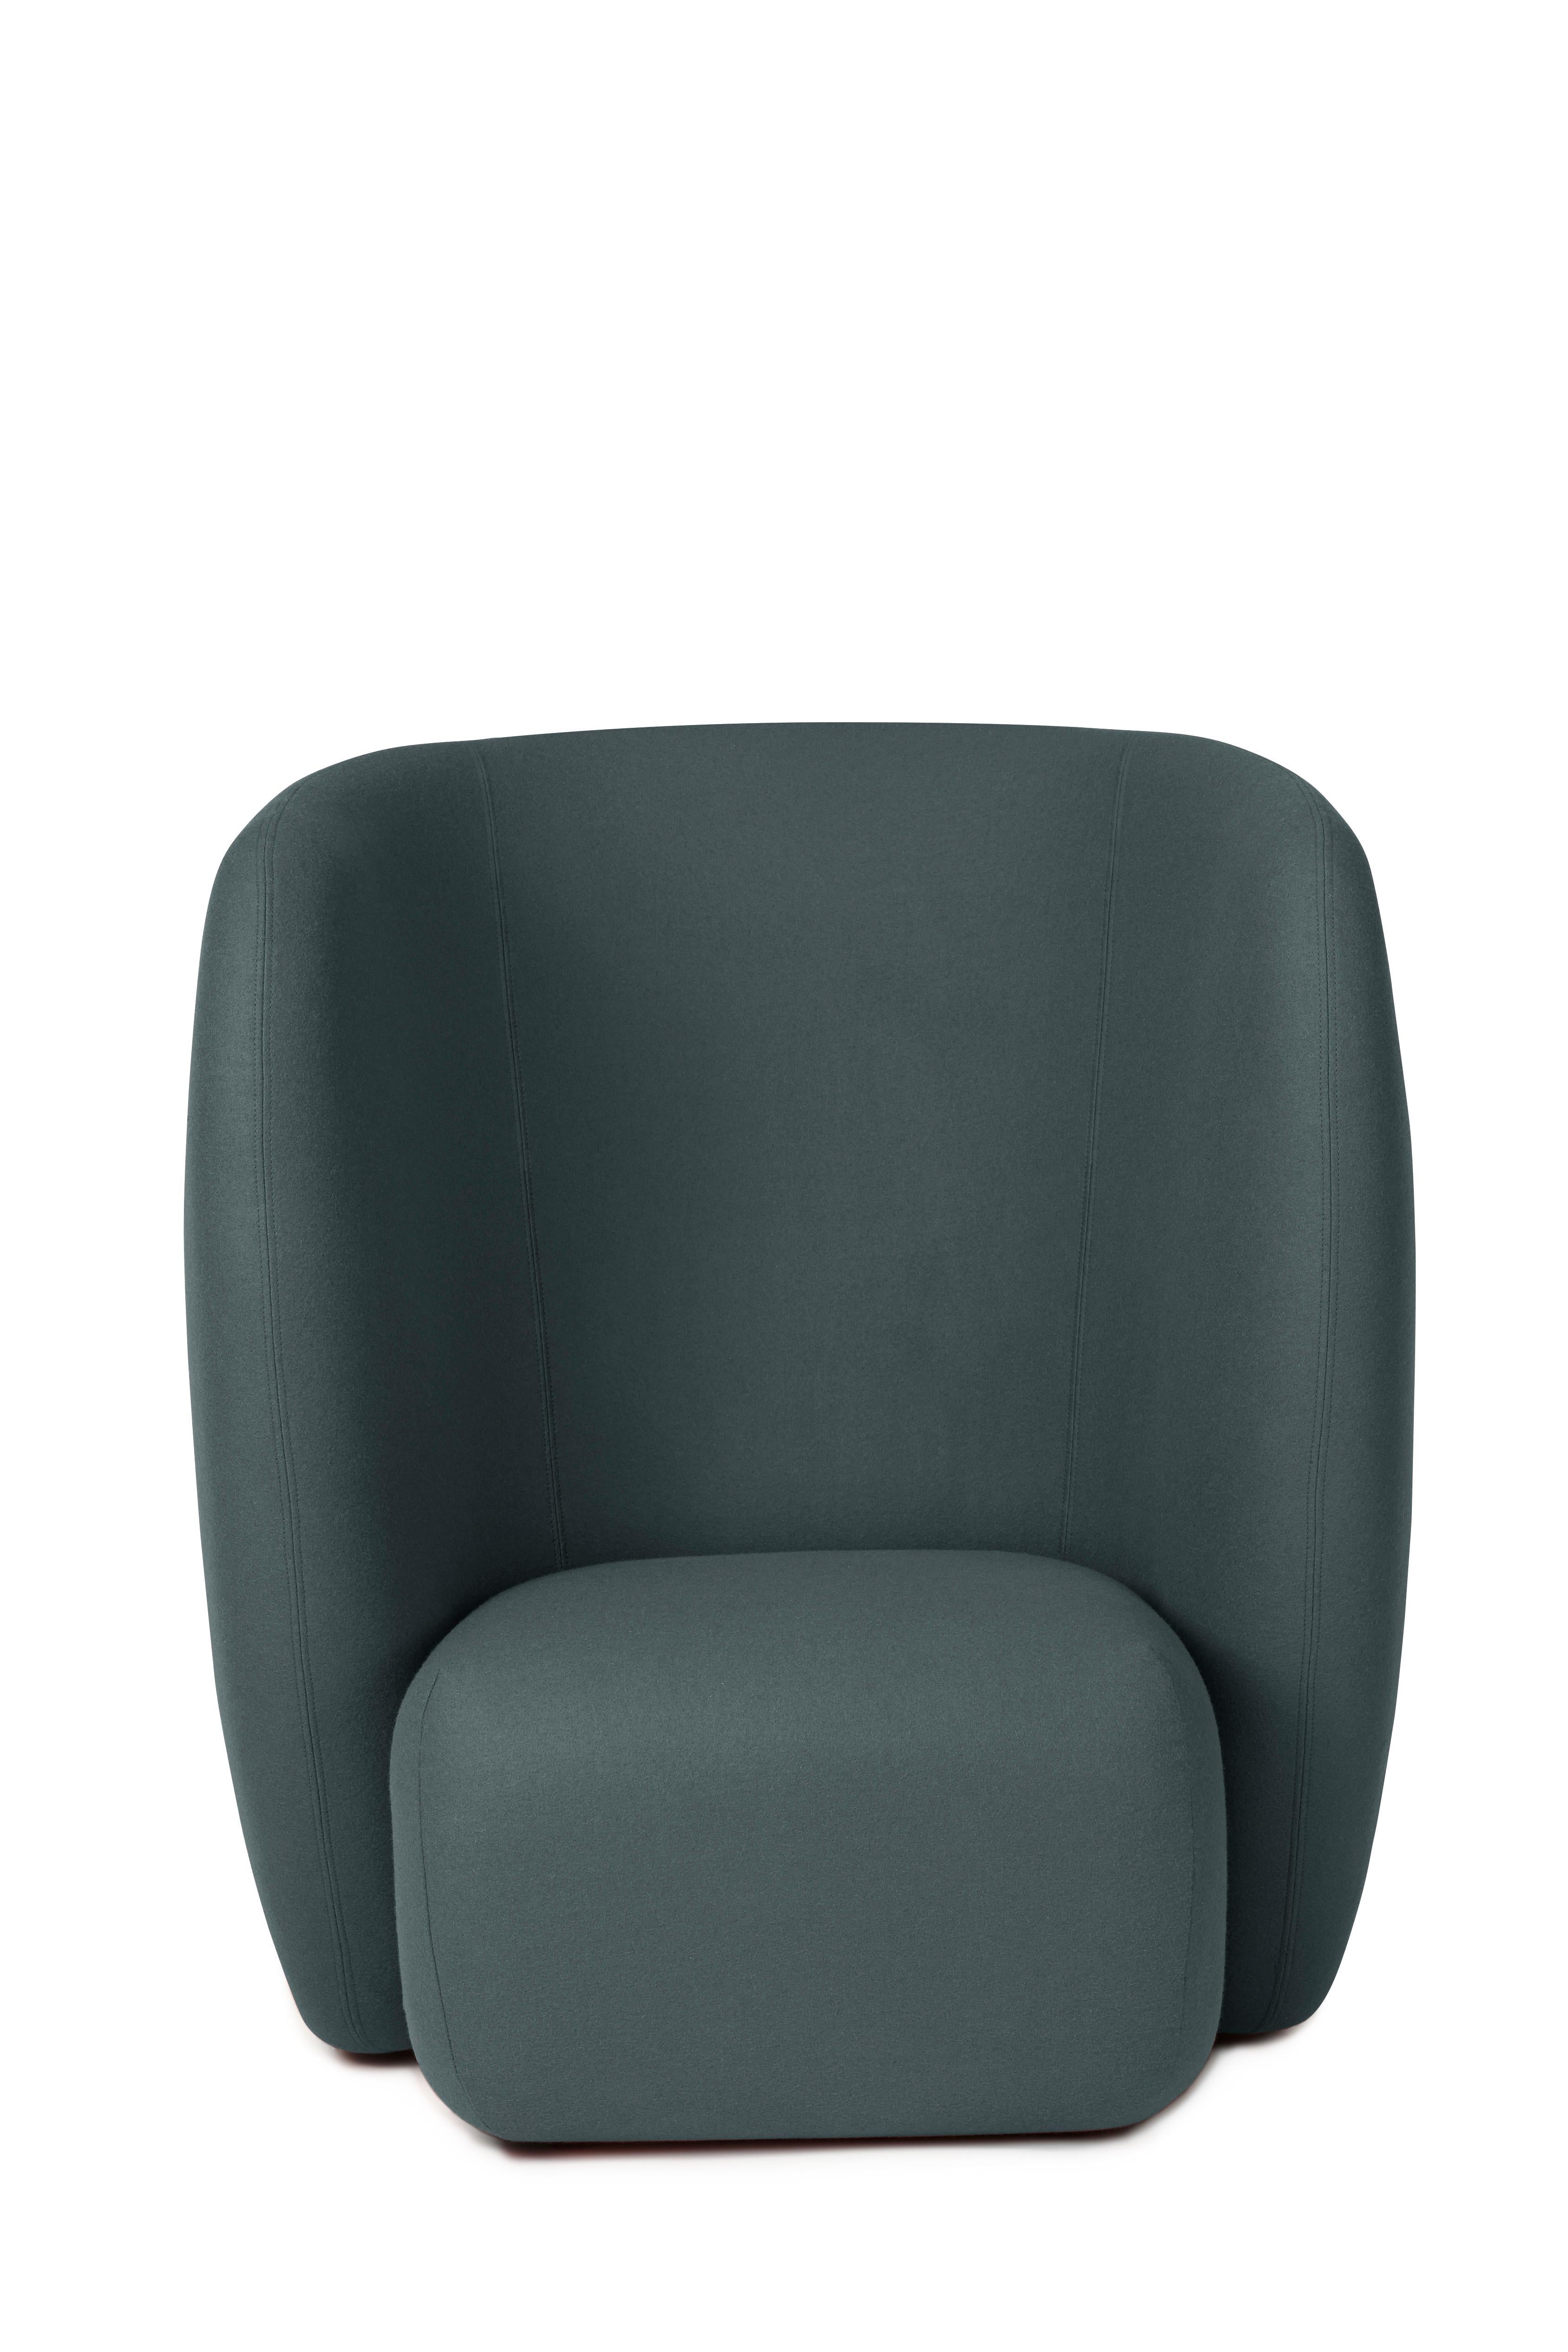 For Sale: Blue (Hero 991) Haven Lounge Chair, by Charlotte Høncke from Warm Nordic